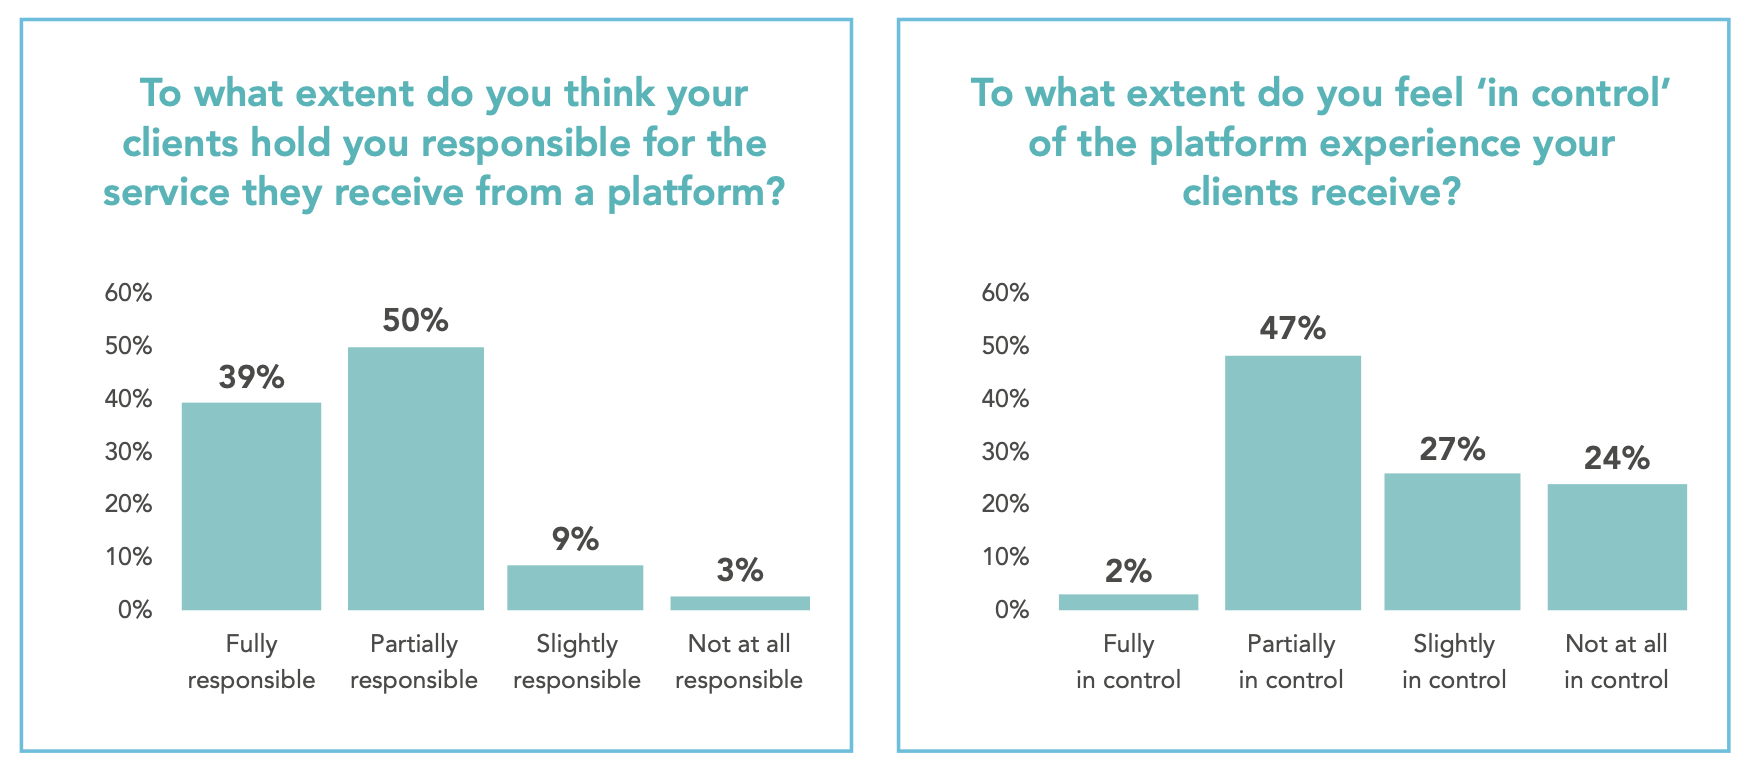 Most firms feel like clients hold them responsible for a platform experience they don't control